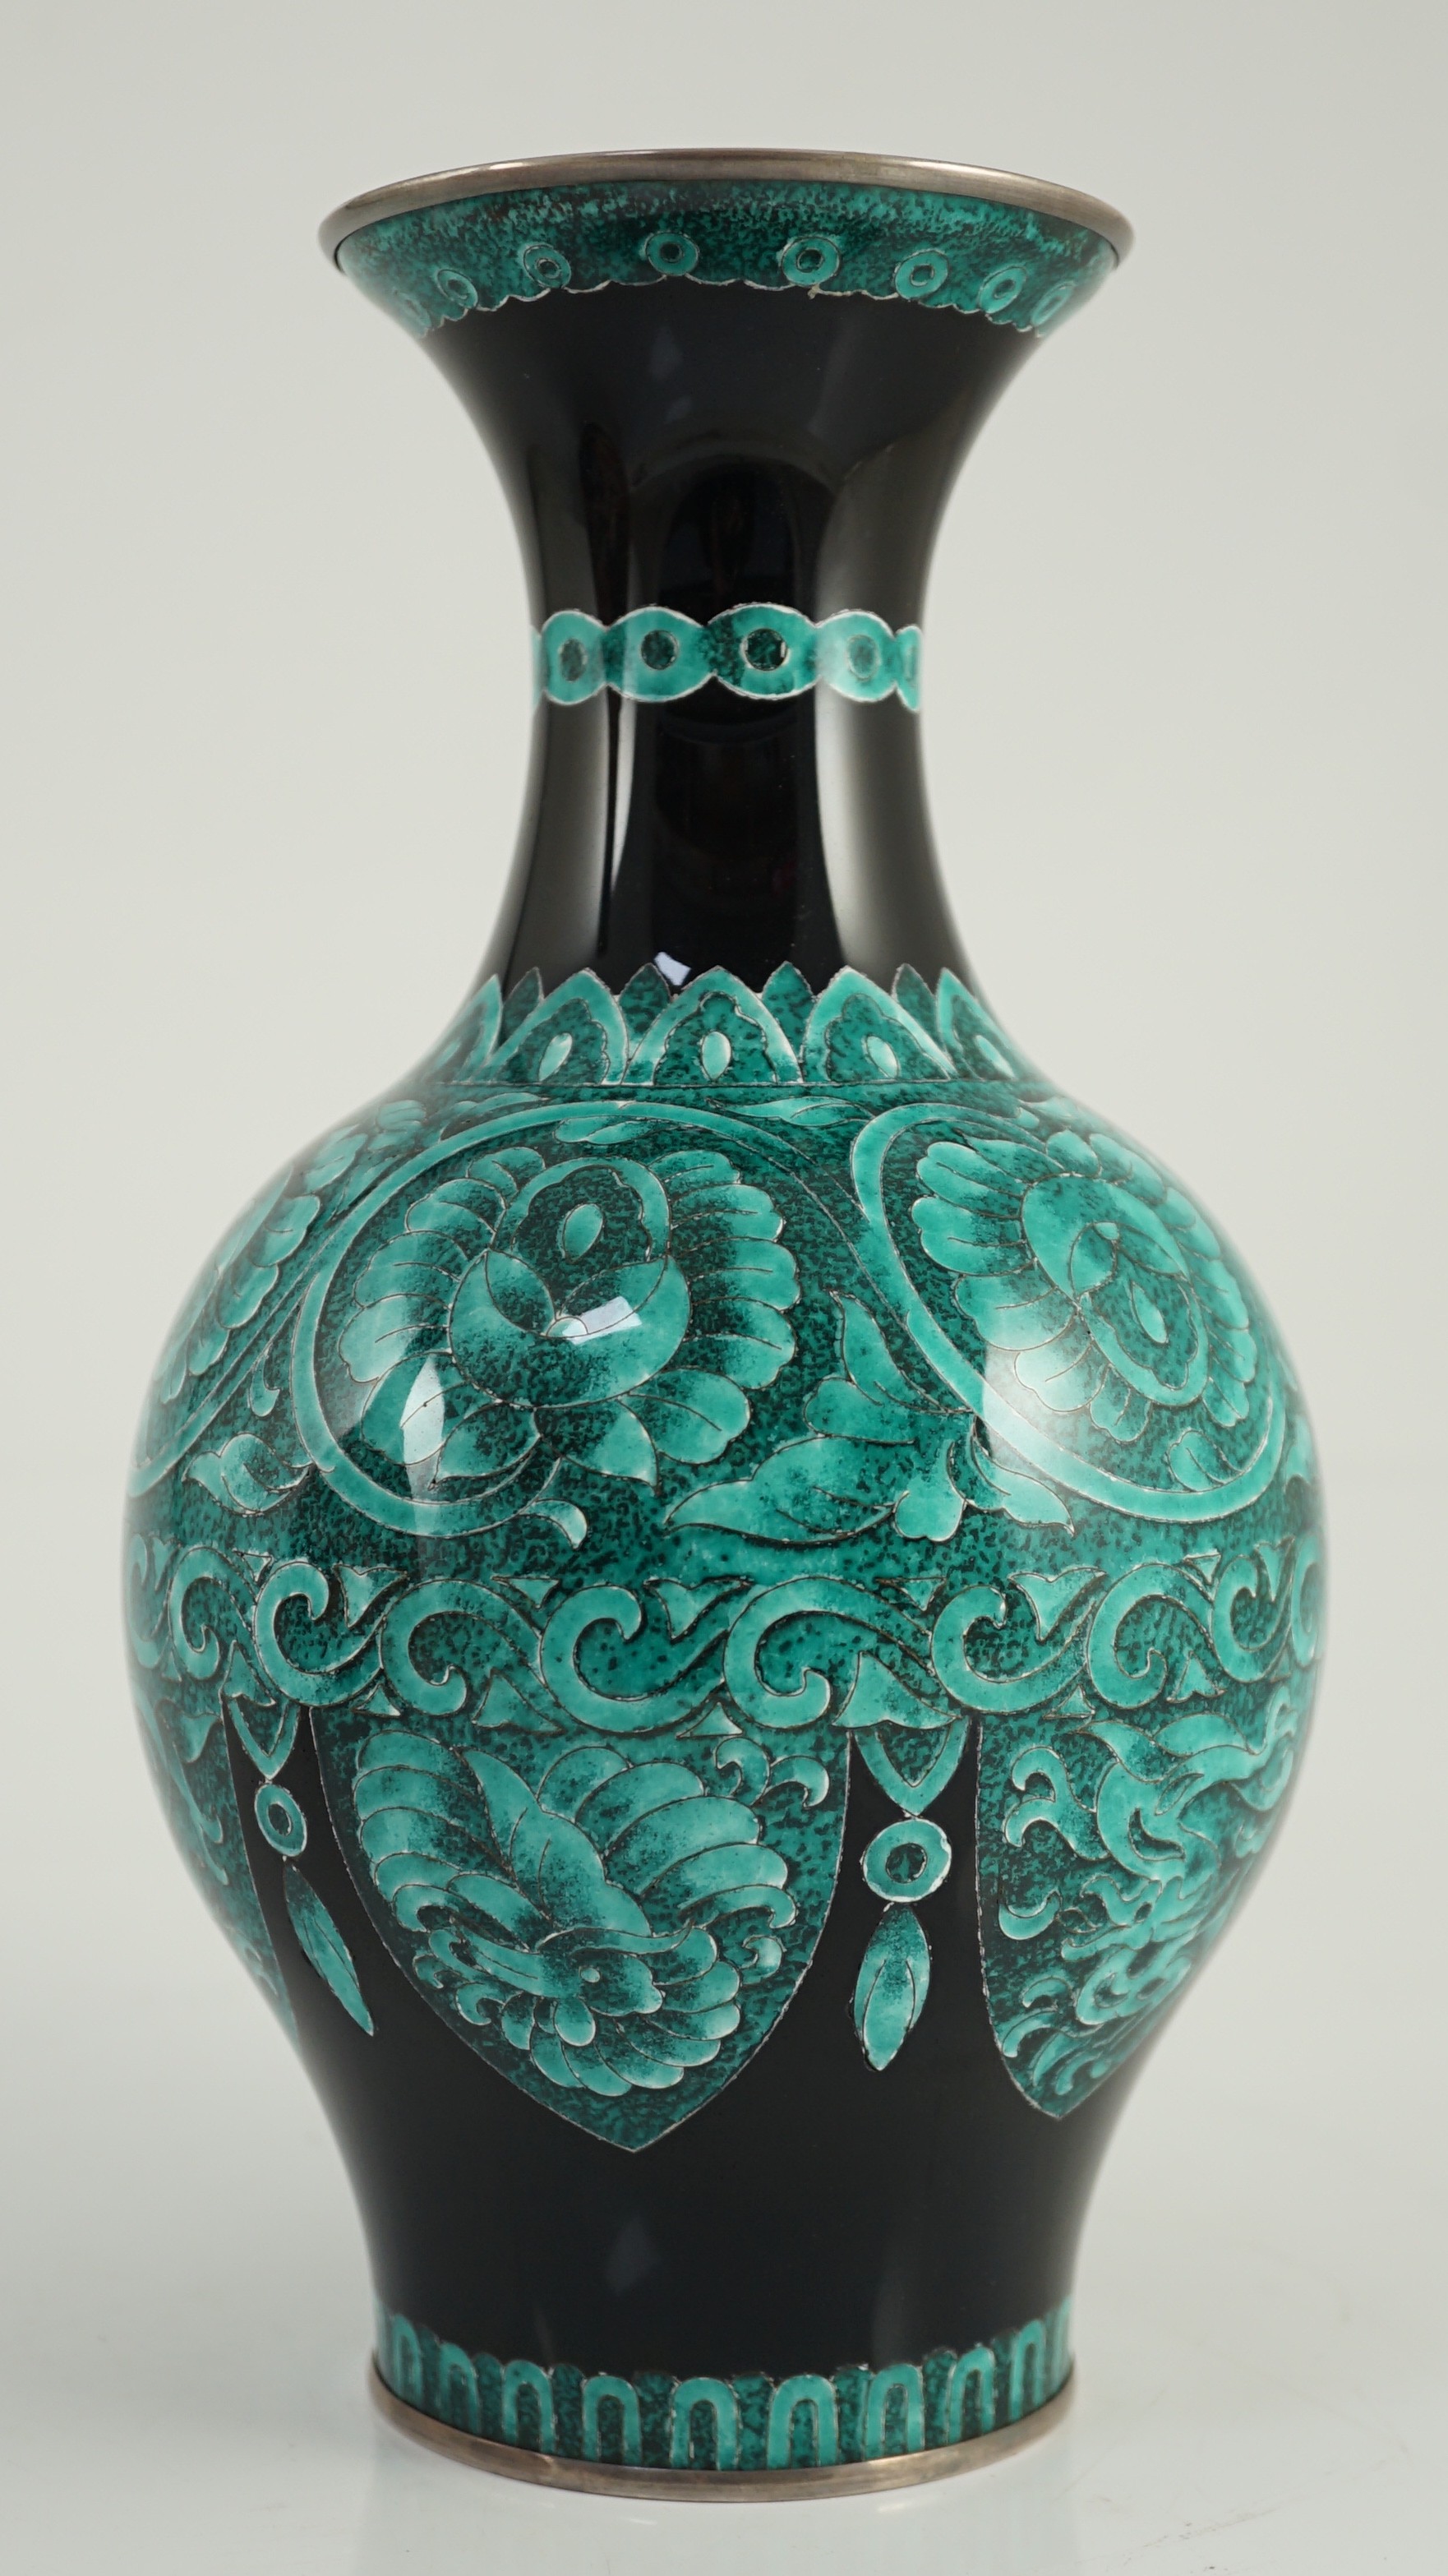 A Japanese silver wire cloisonné enamel vase, by Ota Hiroaki, c.1950s, decorated in archaistic style - Image 2 of 5